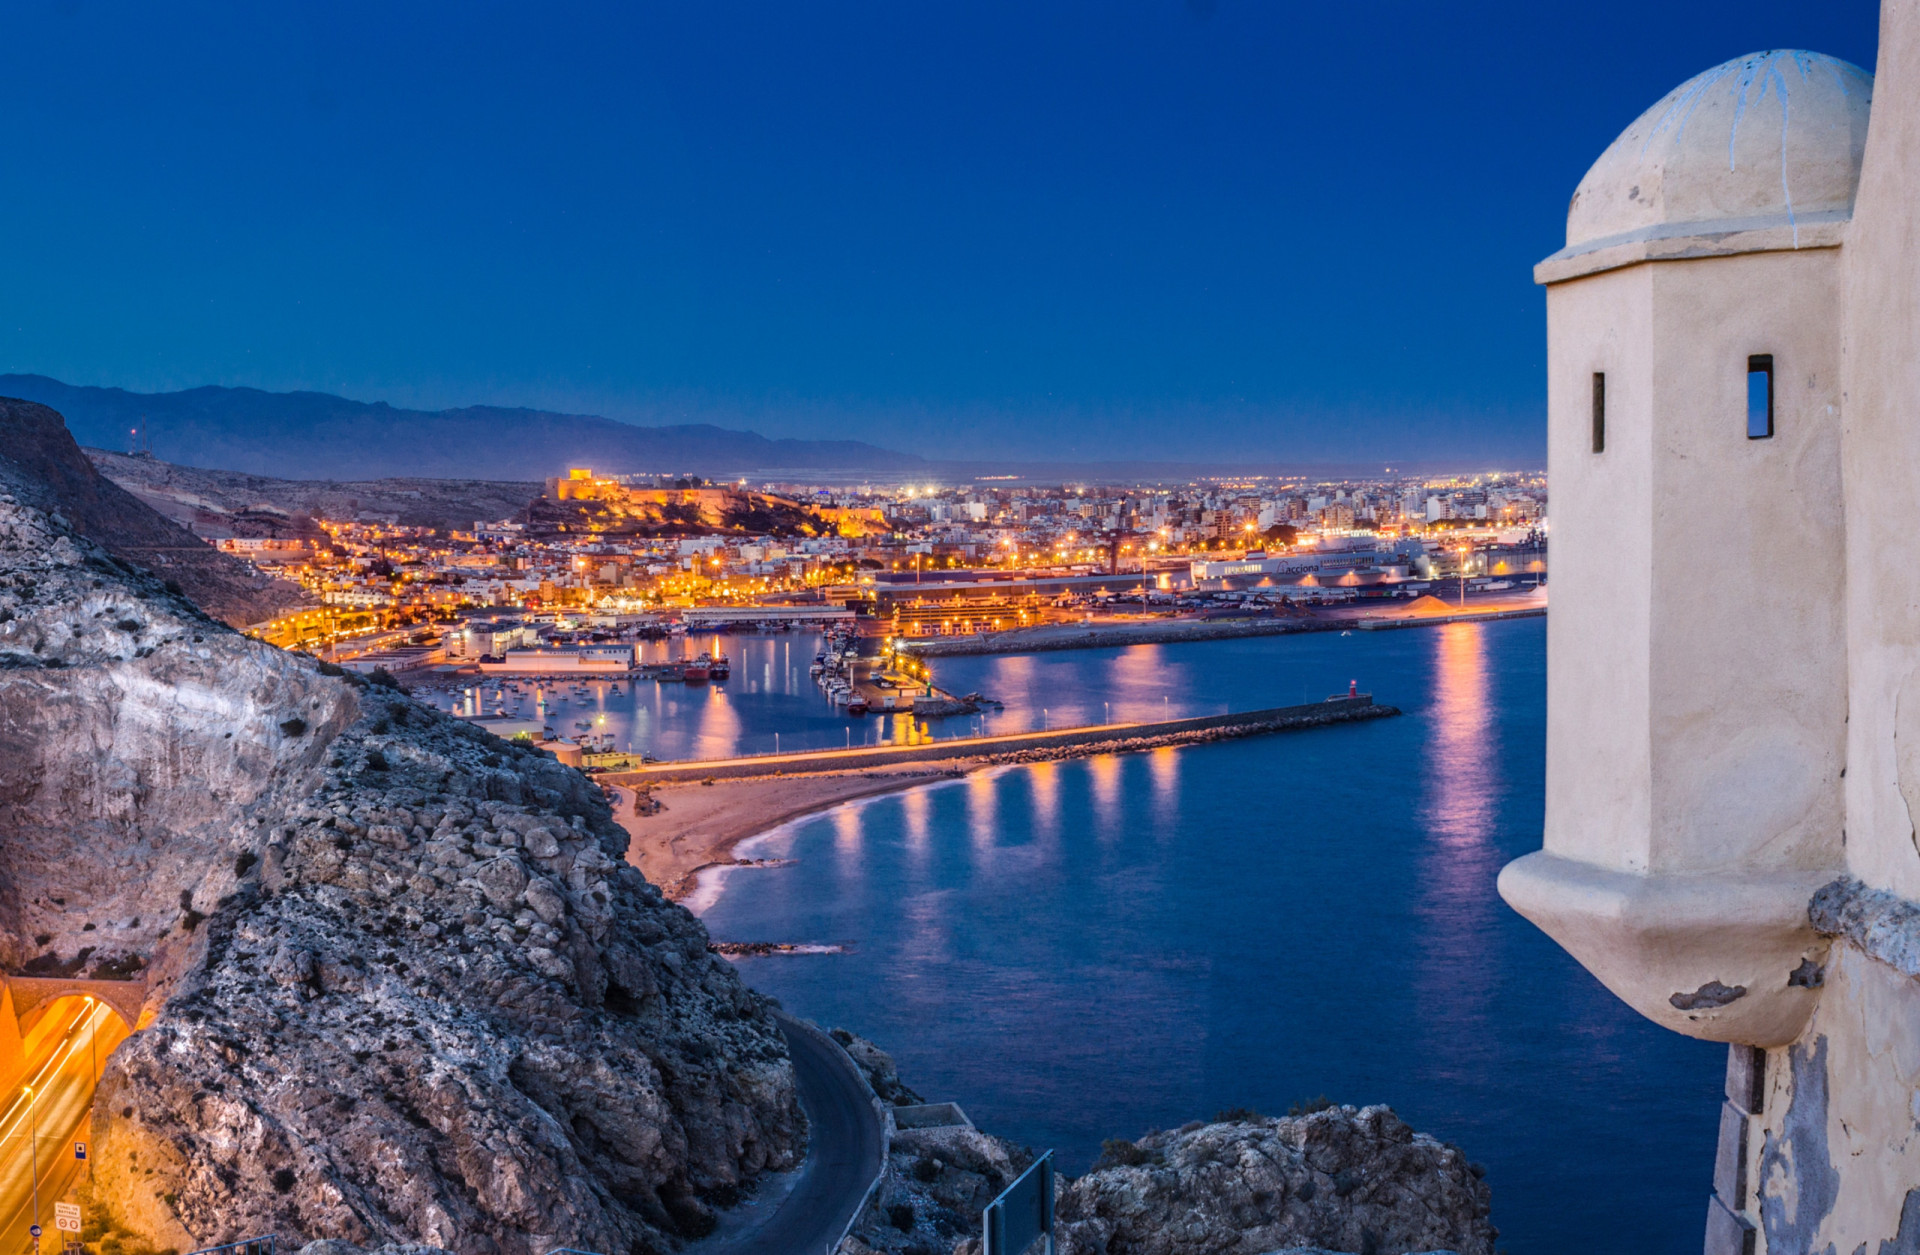 <p>The obvious place in which to ensconce yourself before exploring the region is Almería. Founded in 955 CE, this ancient city melds a Moorish heritage with a Flamenco vibe.</p><p><a href="https://www.msn.com/en-us/community/channel/vid-7xx8mnucu55yw63we9va2gwr7uihbxwc68fxqp25x6tg4ftibpra?cvid=94631541bc0f4f89bfd59158d696ad7e">Follow us and access great exclusive content every day</a></p>